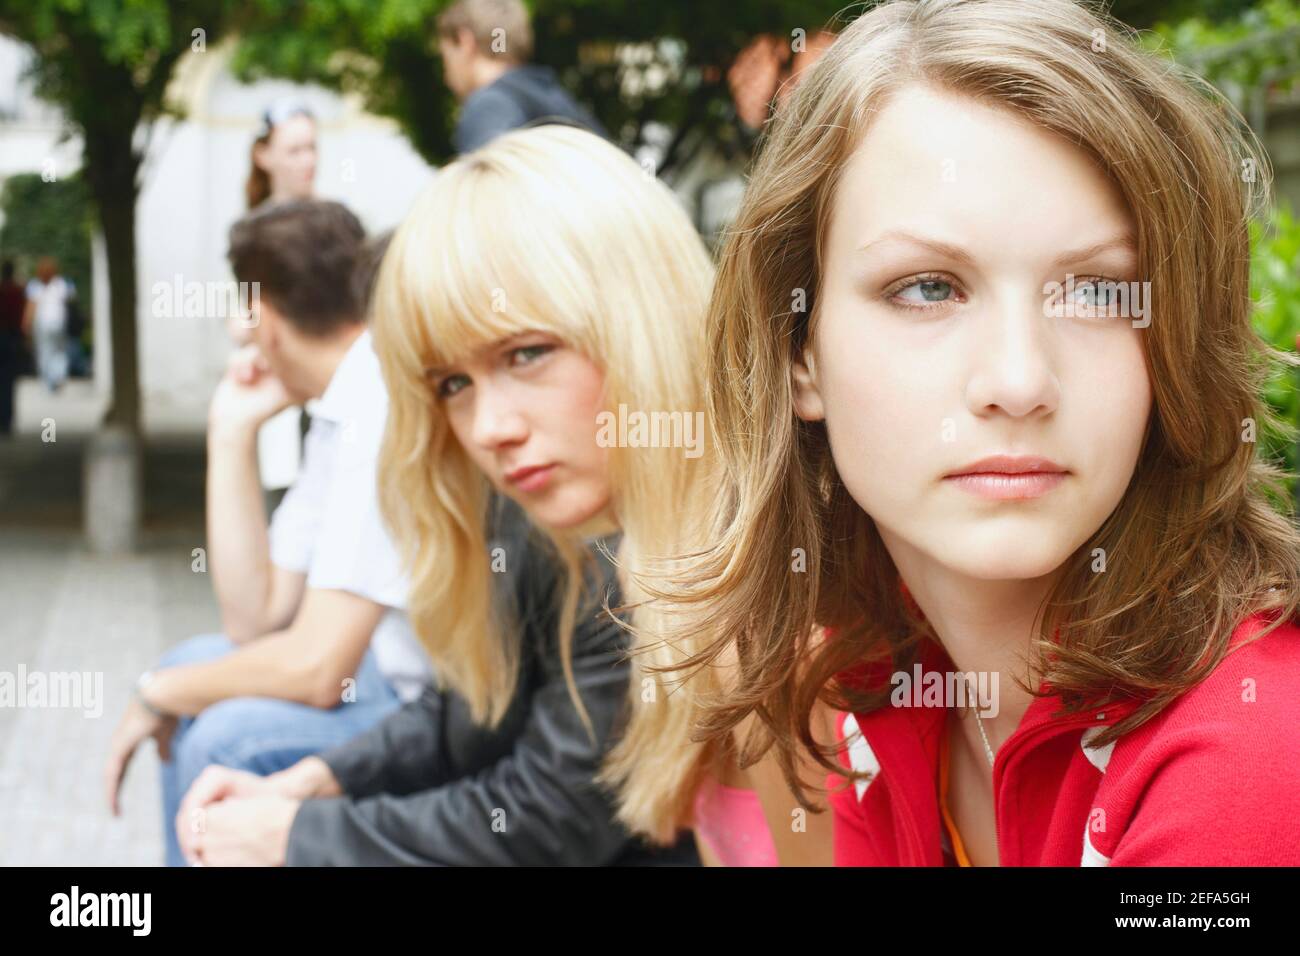 Side profile of a young woman and a teenage girl sitting Stock Photo